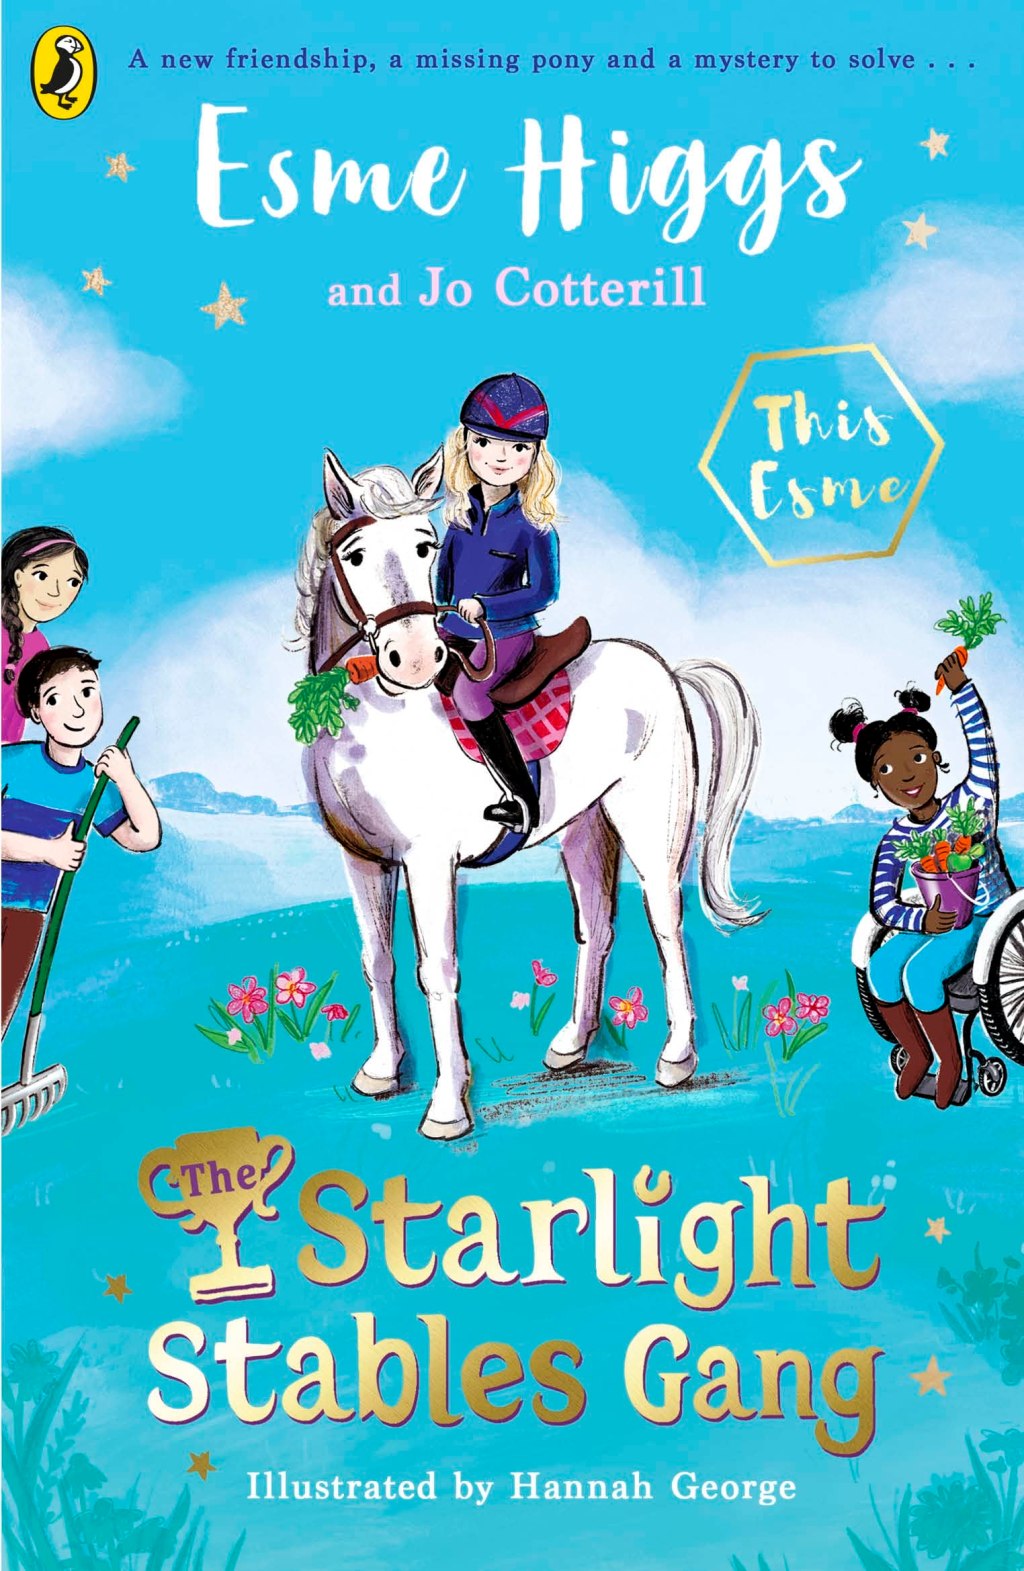 Starlight Stables by Esme Higgs and Jo Cotterill @This_Esme @jocotterillbook @PuffinBooksUk @KaleidoscopicBT #StarlightStablesGang #BookTwitter #AD-PR #gifted #MgFiction